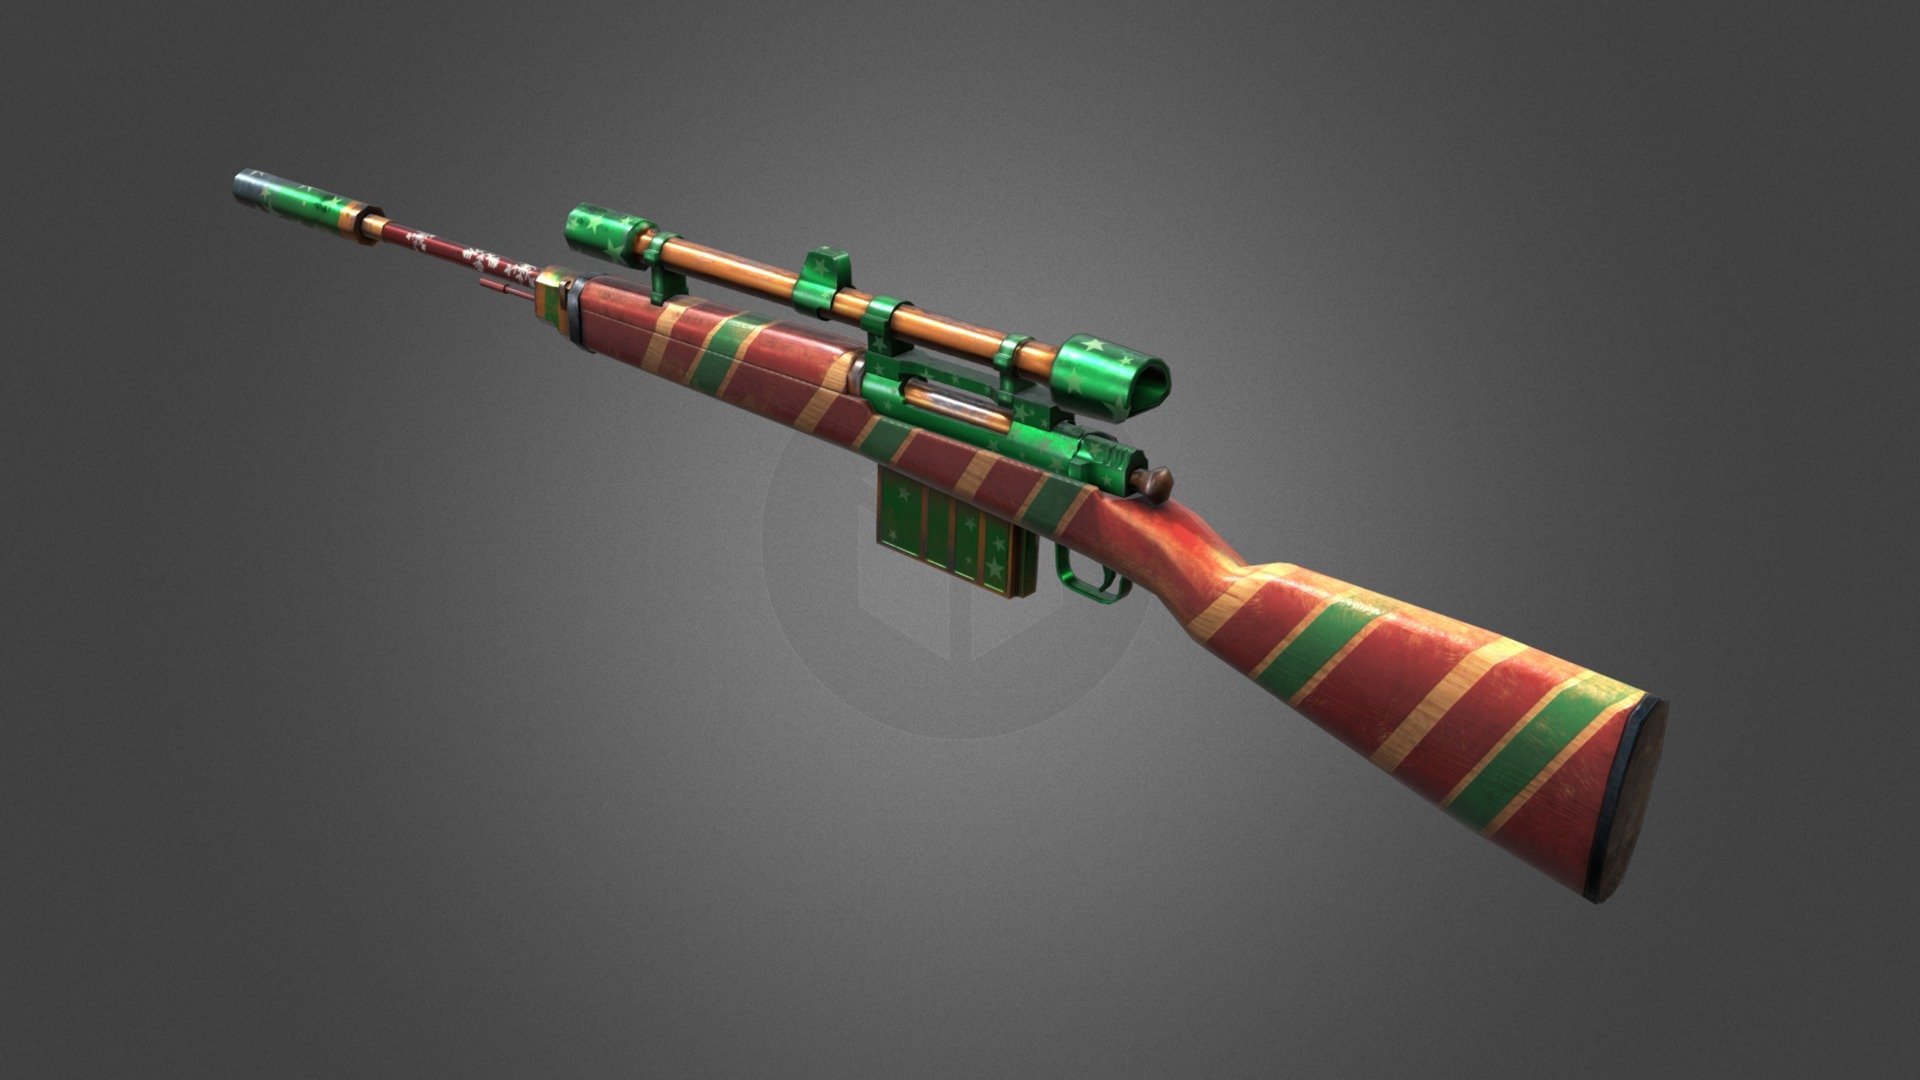 Reskin project in my workplace games
Skin concept by Adela Devina
Textured in substance painter - M1903 Rifle Christmas Theme - 3D model by AlanBah 3d model